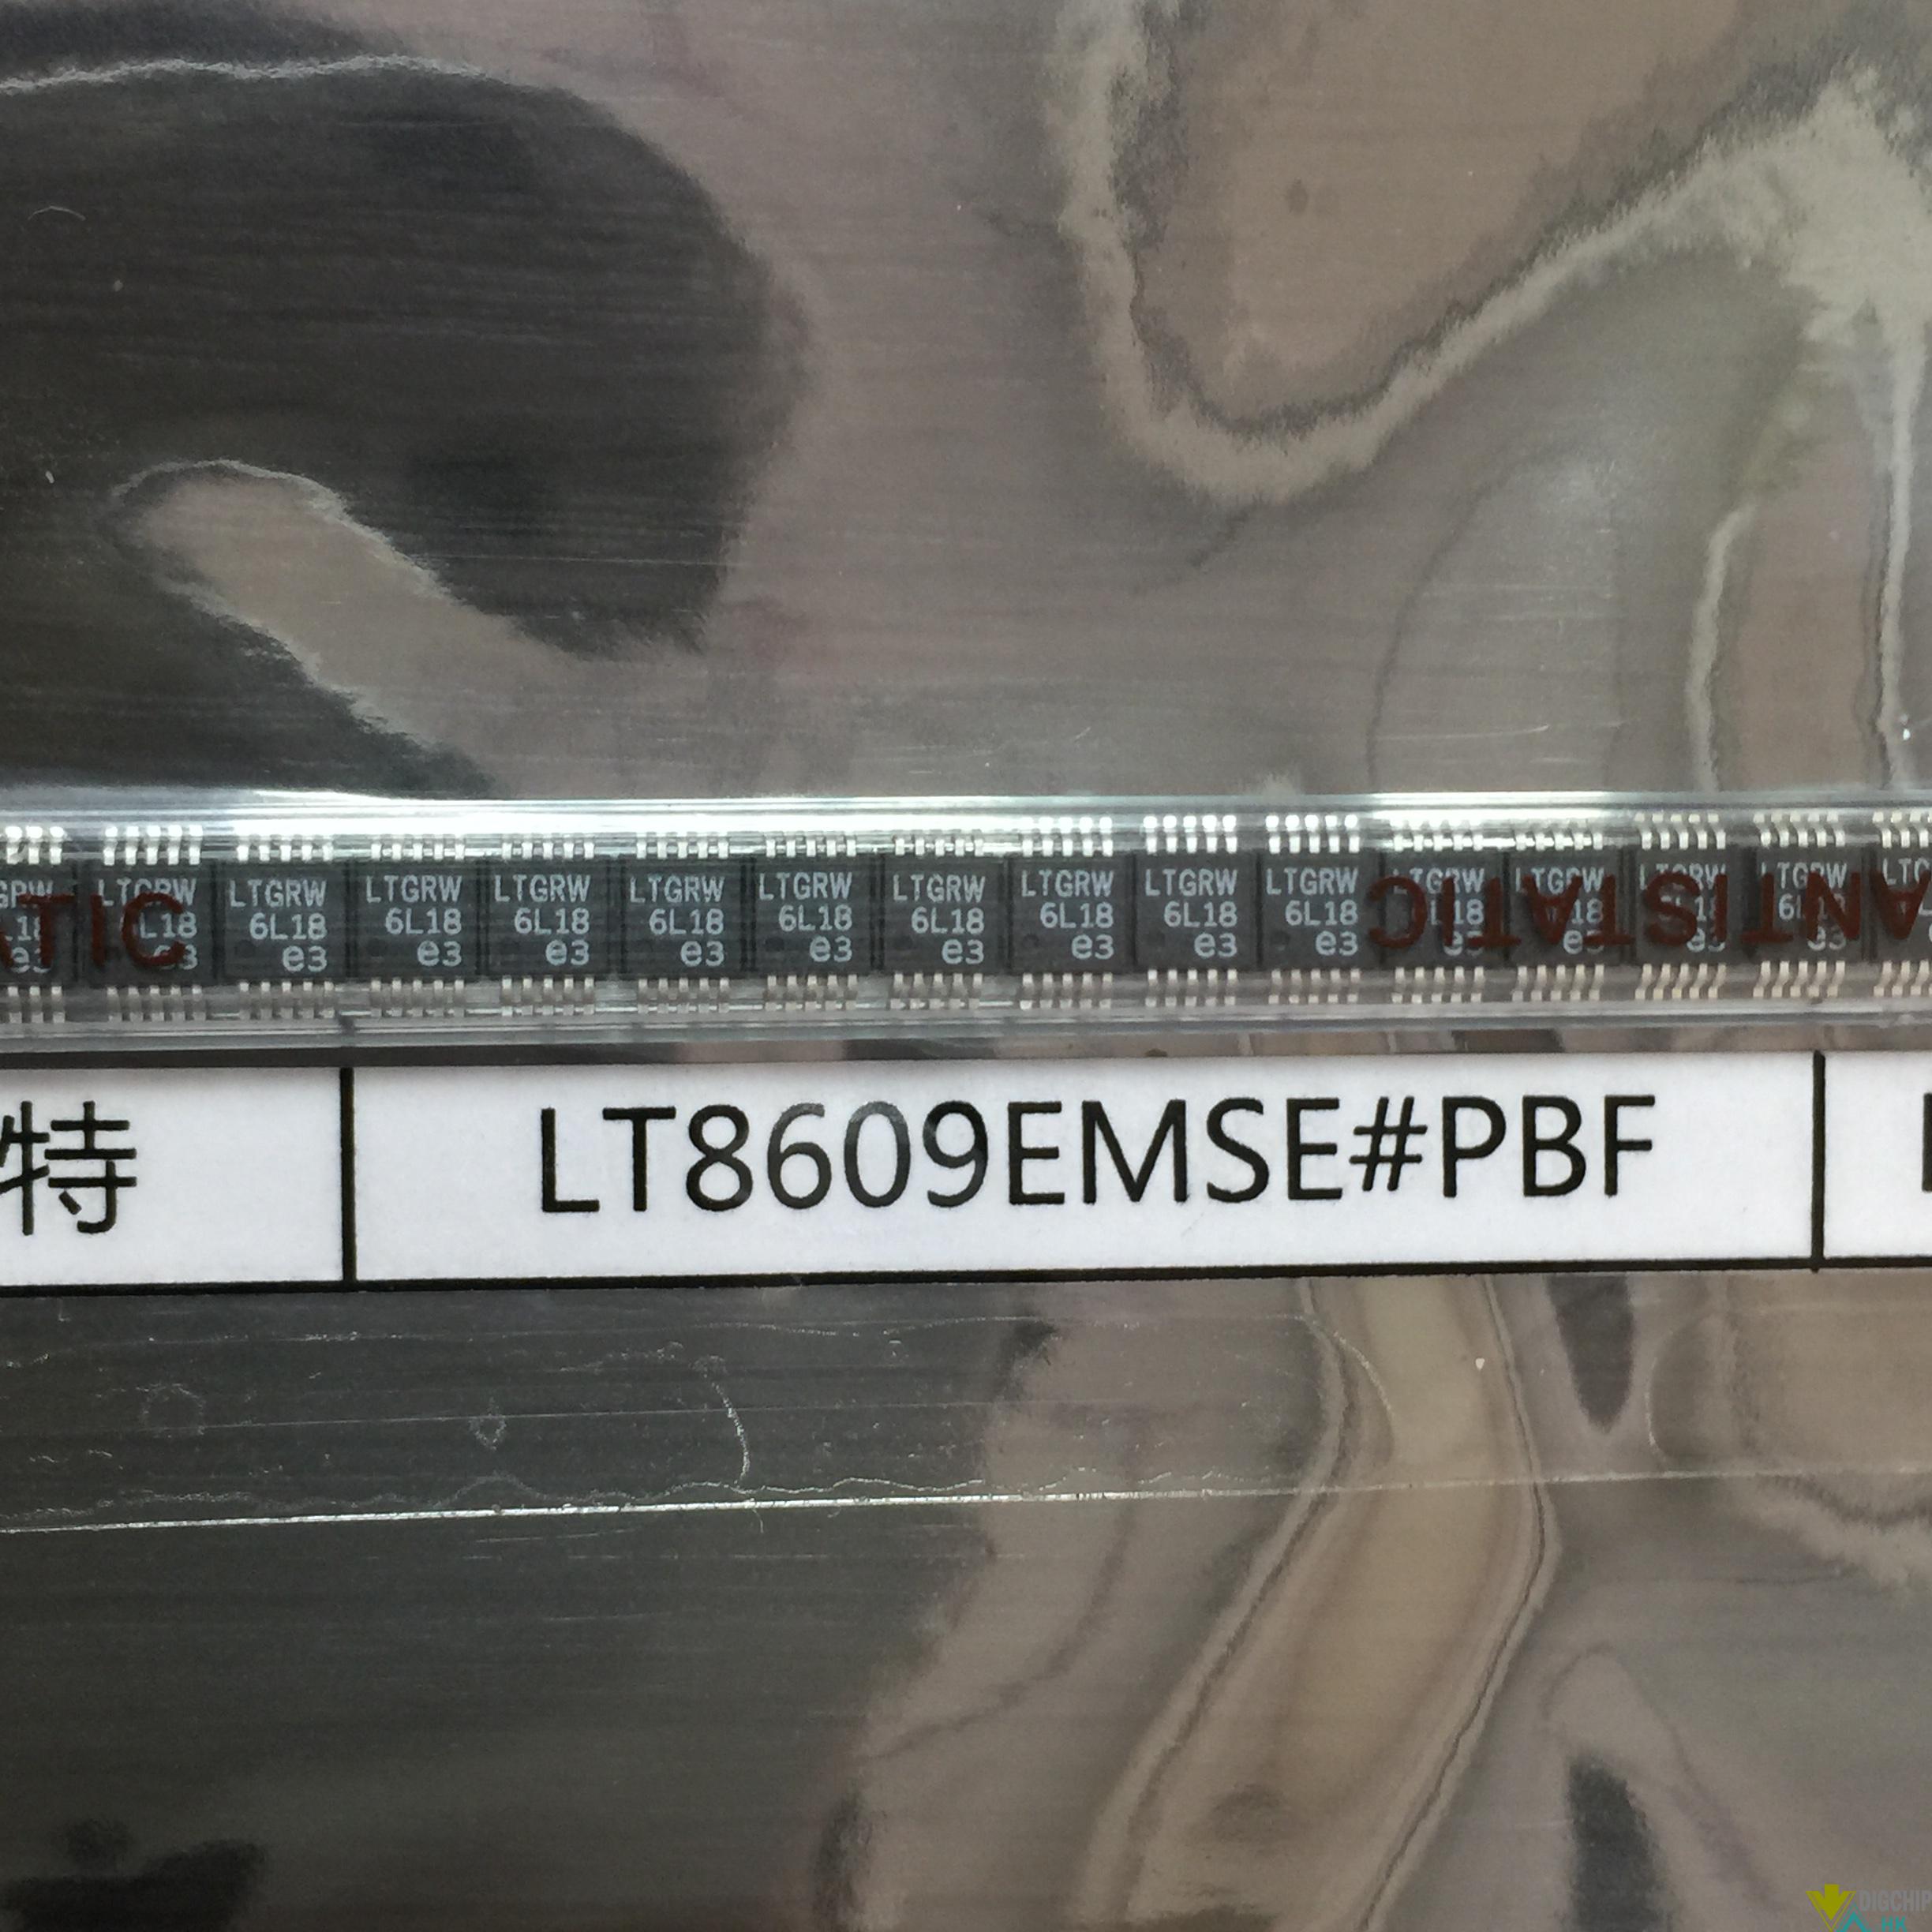 LT8609/LT8609A/LT8609B - 42V, 2A/3A Peak Synchronous Step-Down Regulator with 2.5µA Quiescent Current; Package: MSOP; Pins: 10; Temperature Range: -40°C to 85°C